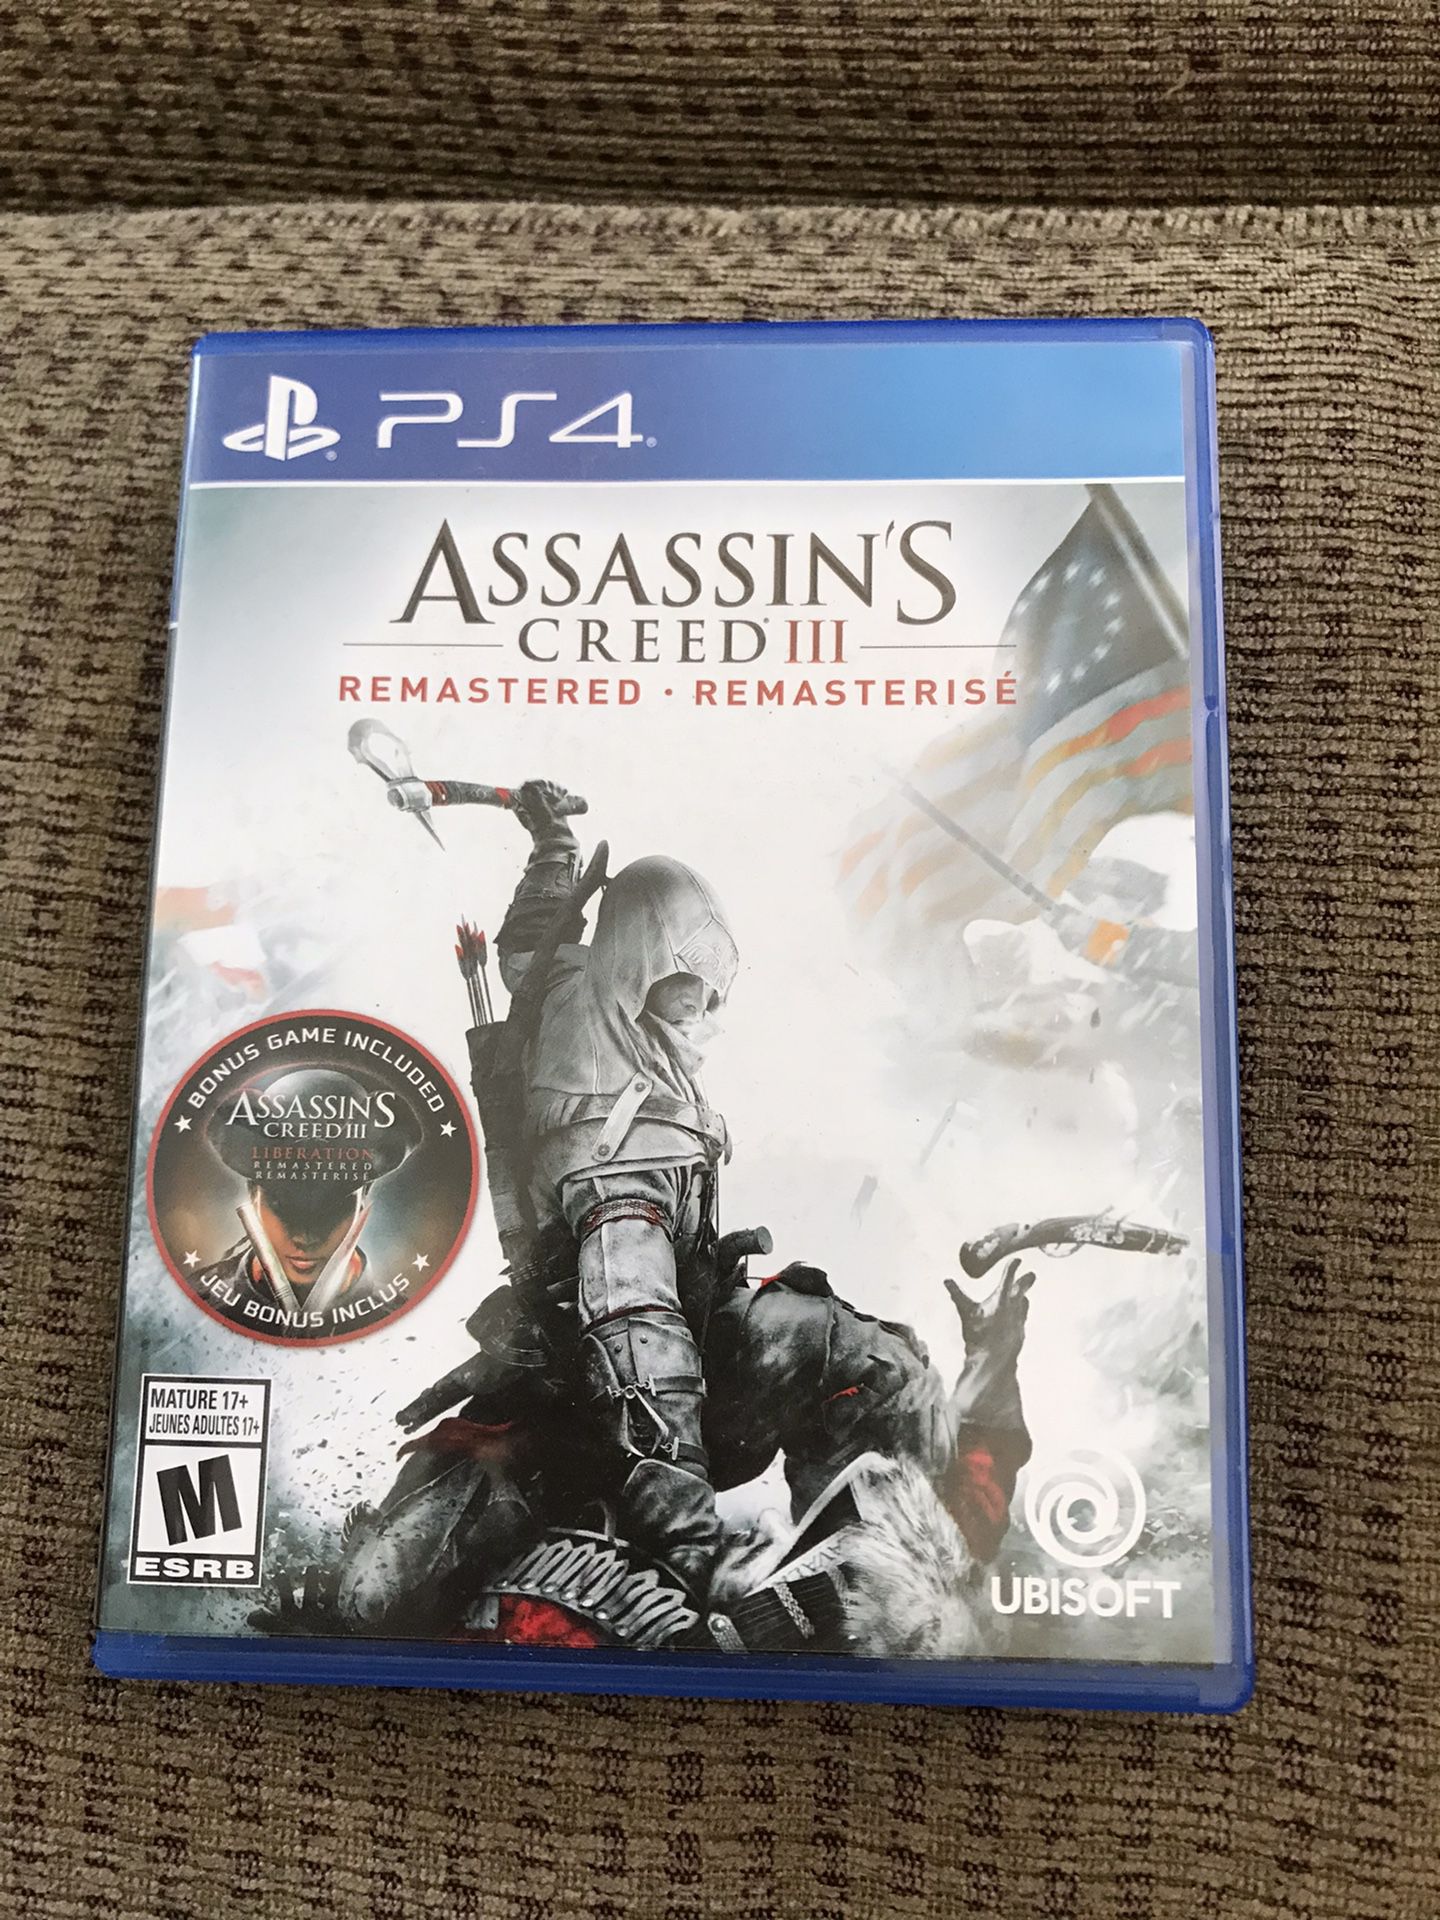 behandle pulver Kinematik PS4 Game: Assassins Creed 3 Remastered for Sale in Menifee, CA - OfferUp